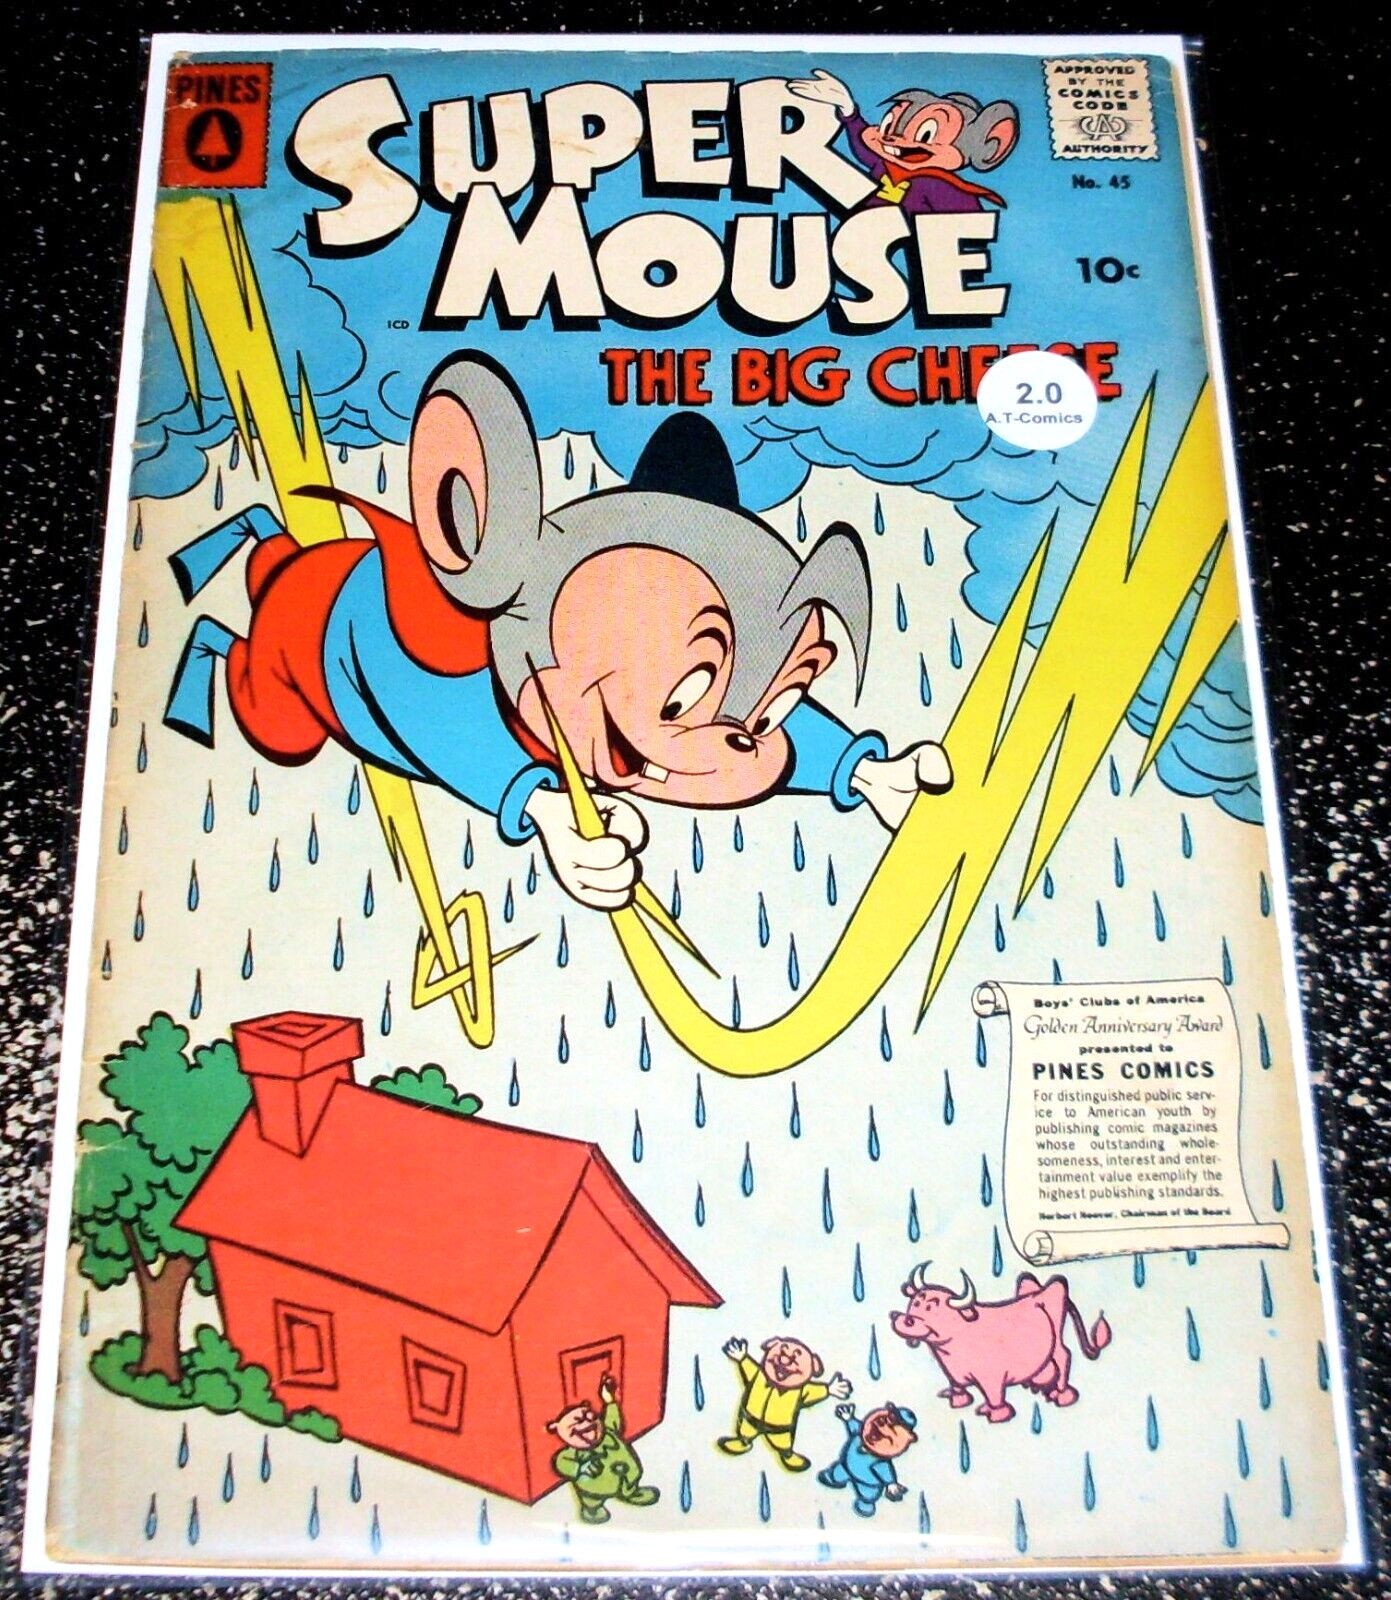 Super Mouse 45 (2.0) 1958 Pines Comic- Flat Rate Shipping